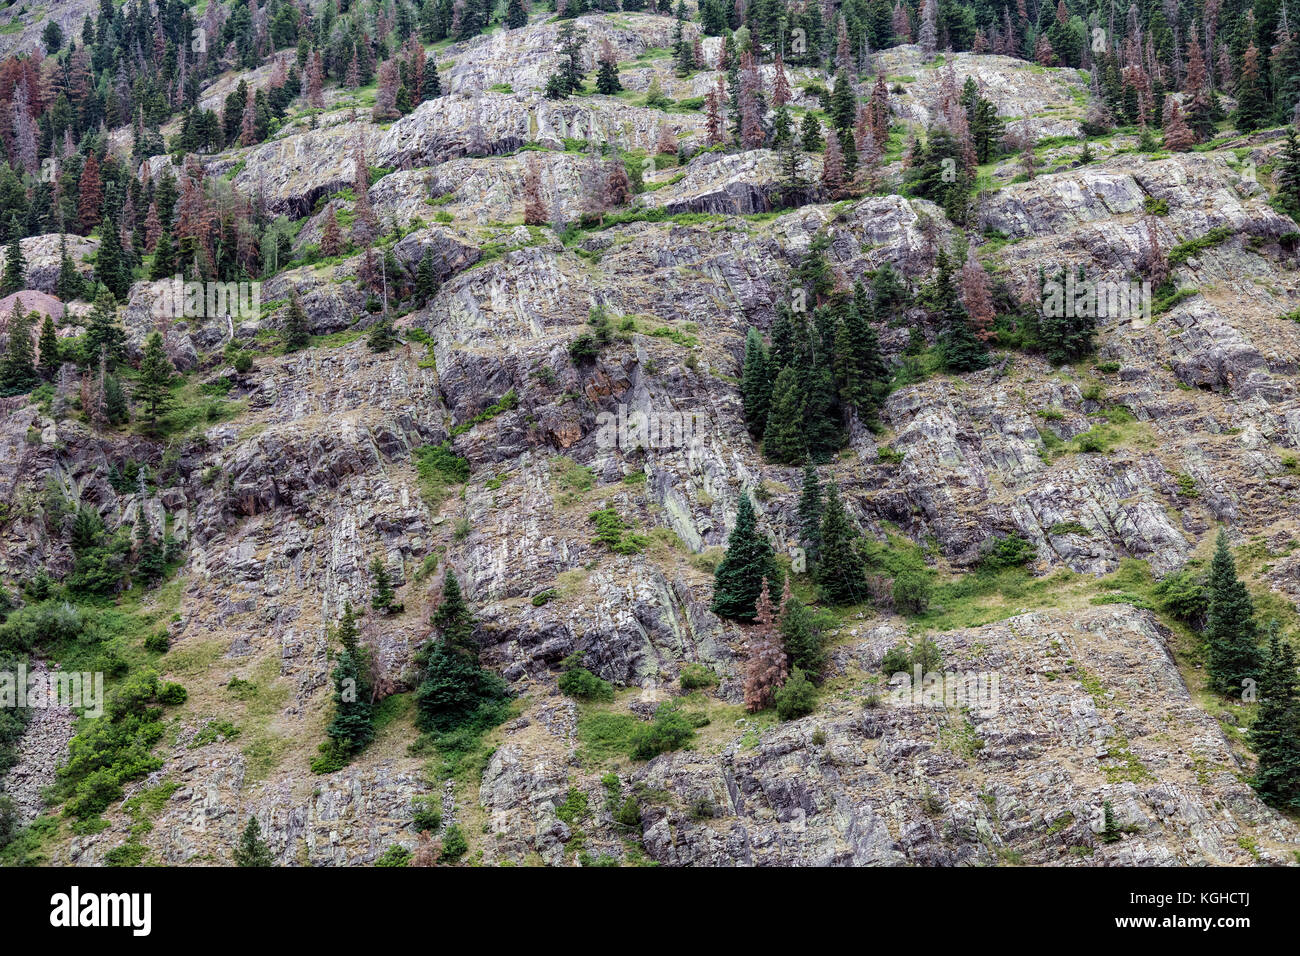 Exposed Vertical Strata, near Ouray, CO Stock Photo